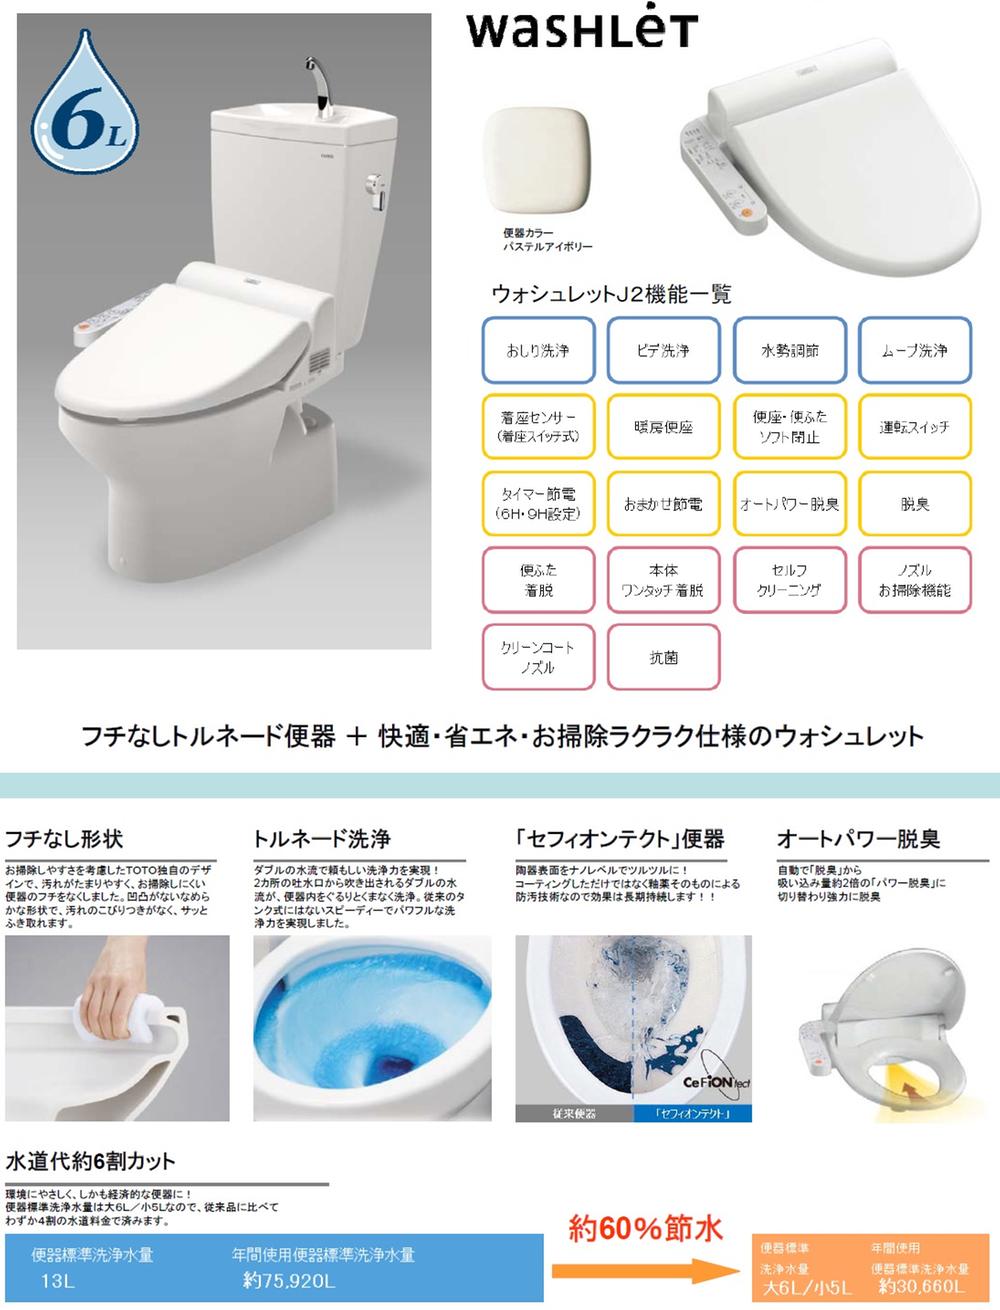 Toilet.  ■ name TOTO made of toilet  ■ caption  ・ Borderless shape in consideration of the cleaning ease  ・ Tornado cleaning to wash all over the inside of the toilet bowl in the double of water flow  ・ The pottery surface was coated in slippery at the nano level, "Sefi